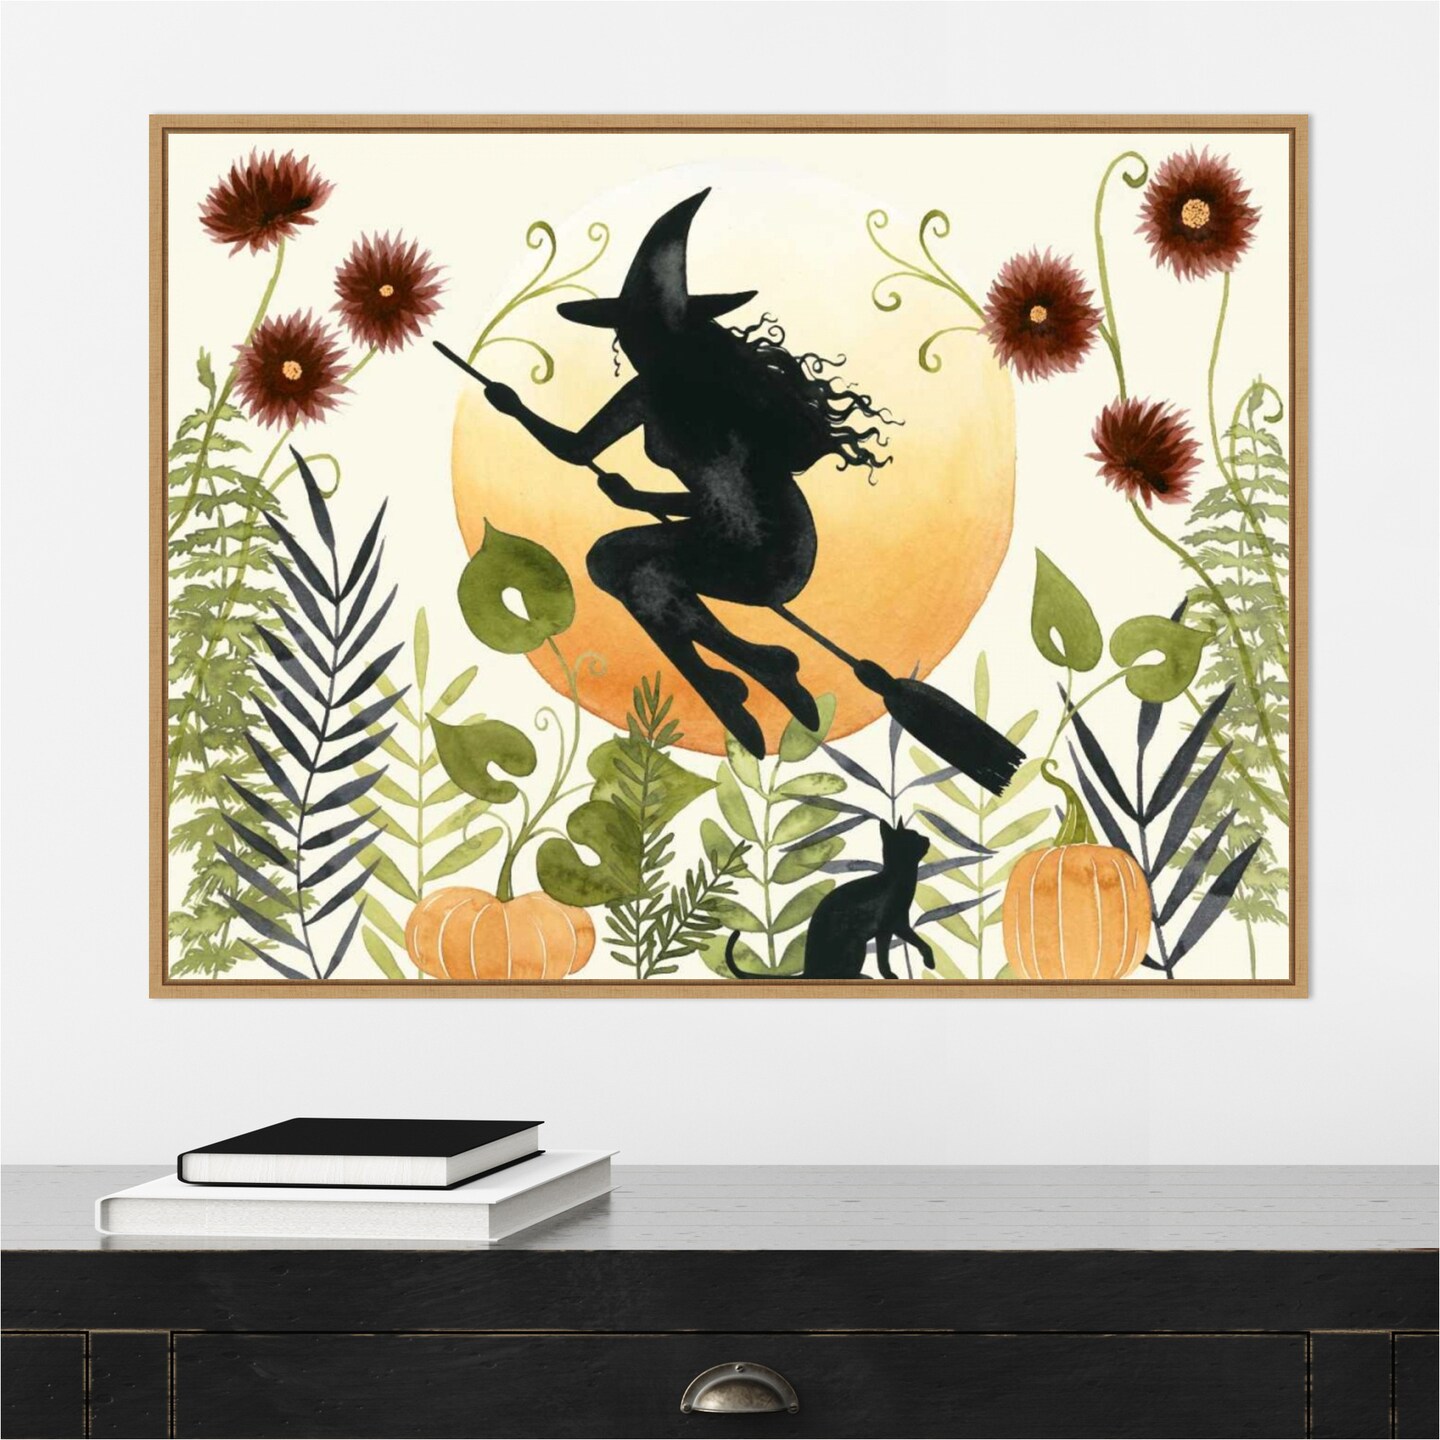 The Witchs Garden I by Grace Popp 30-in. W x 23-in. H. Canvas Wall Art Print Framed in Natural